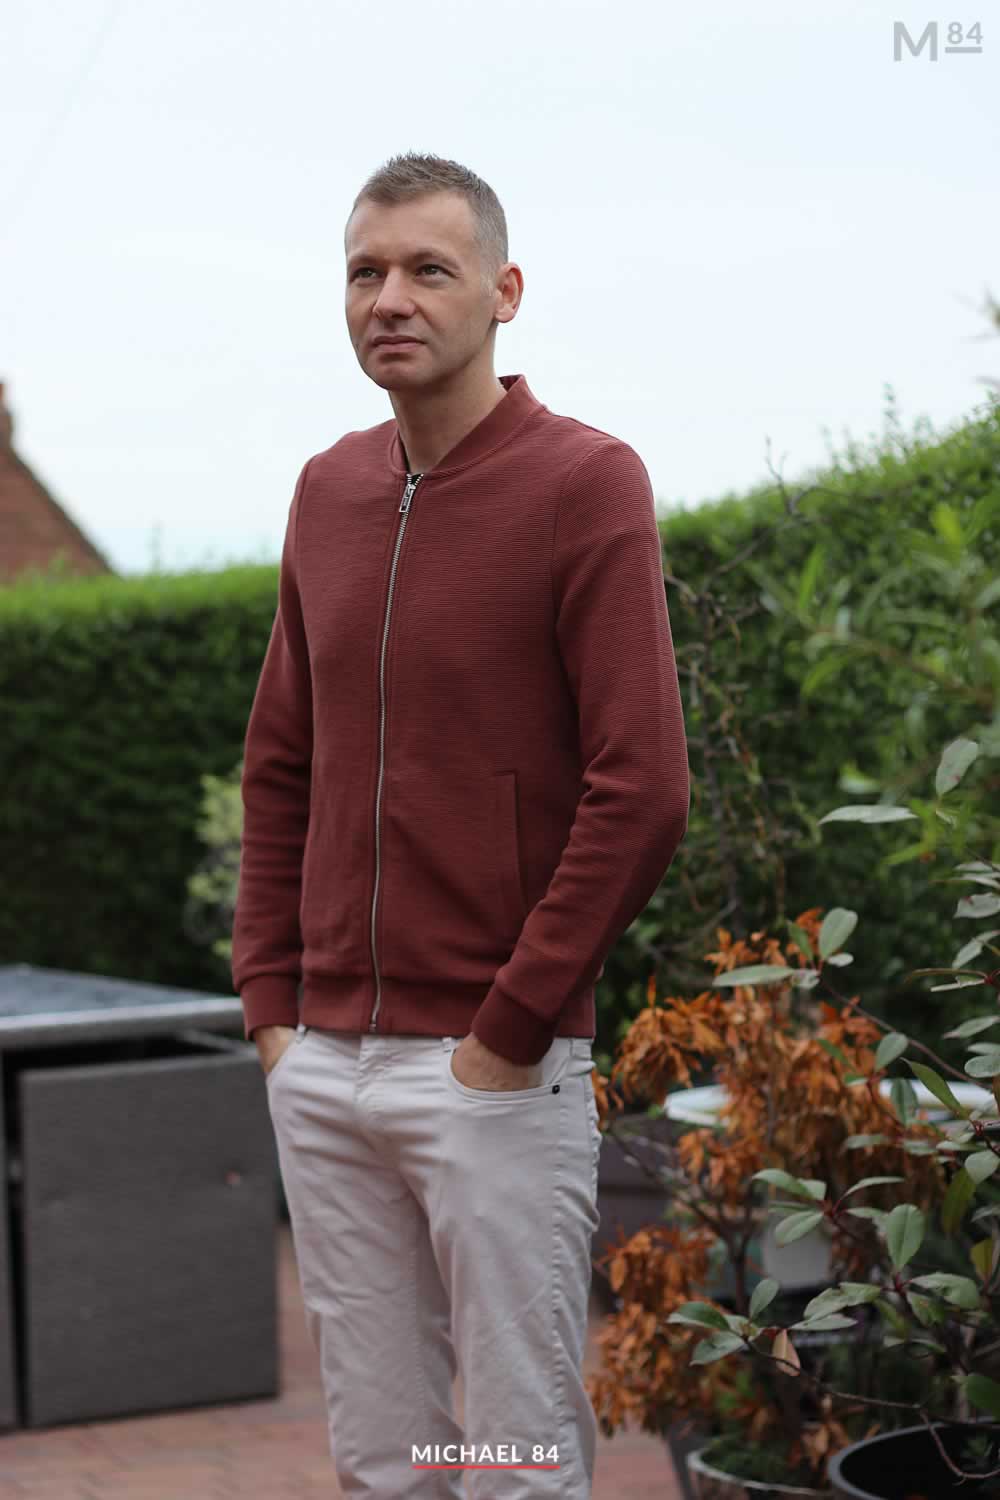 Brown Cardigan & Beige Chinos Outfit - Muted Colours For Autumn | Michael 84